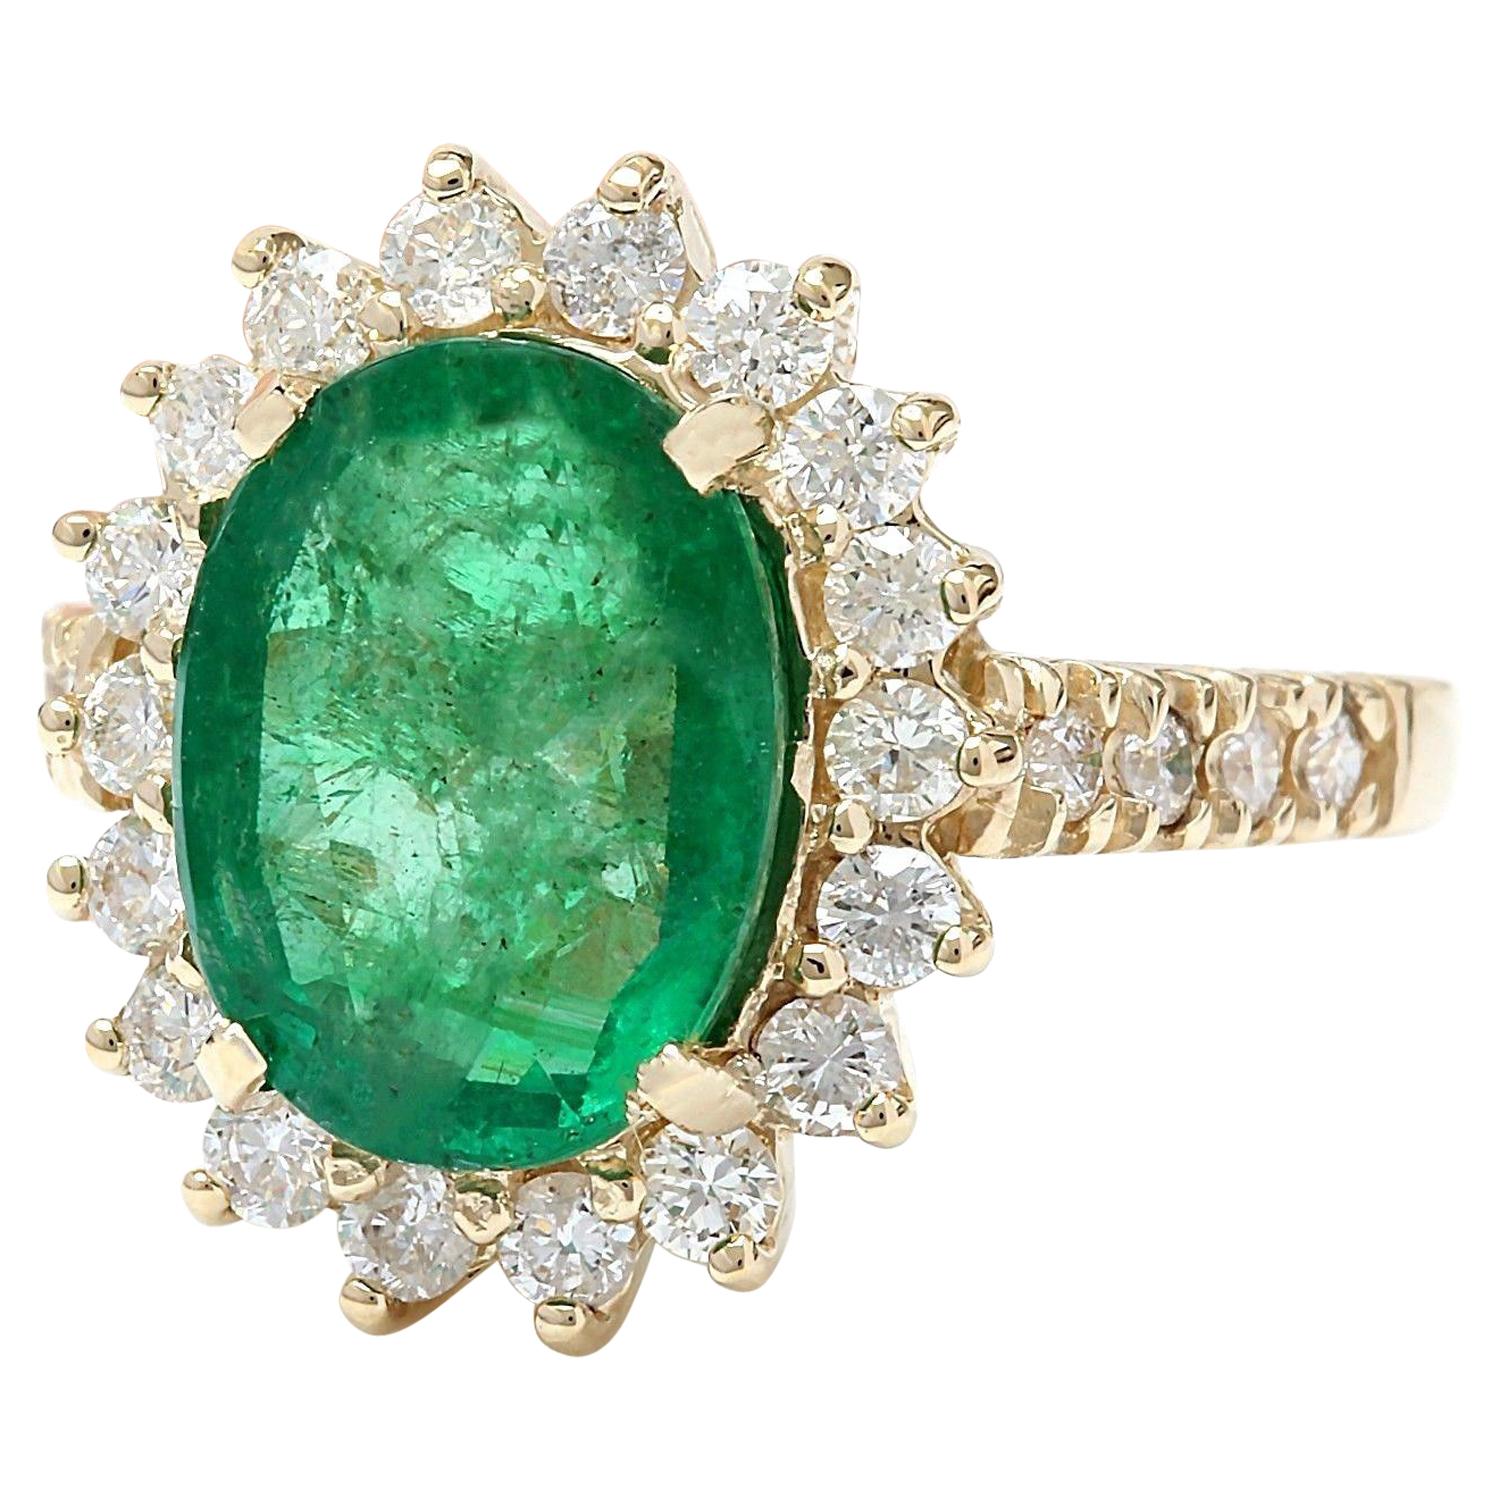 4.23 Carat Natural Emerald 14K Solid Yellow Gold Diamond Ring
 Item Type: Ring
 Item Style: Engagement
 Material: 14K Yellow Gold
 Mainstone: Emerald
 Stone Color: Green
 Stone Weight: 3.43 Carat
 Stone Shape: Oval
 Stone Quantity: 1
 Stone